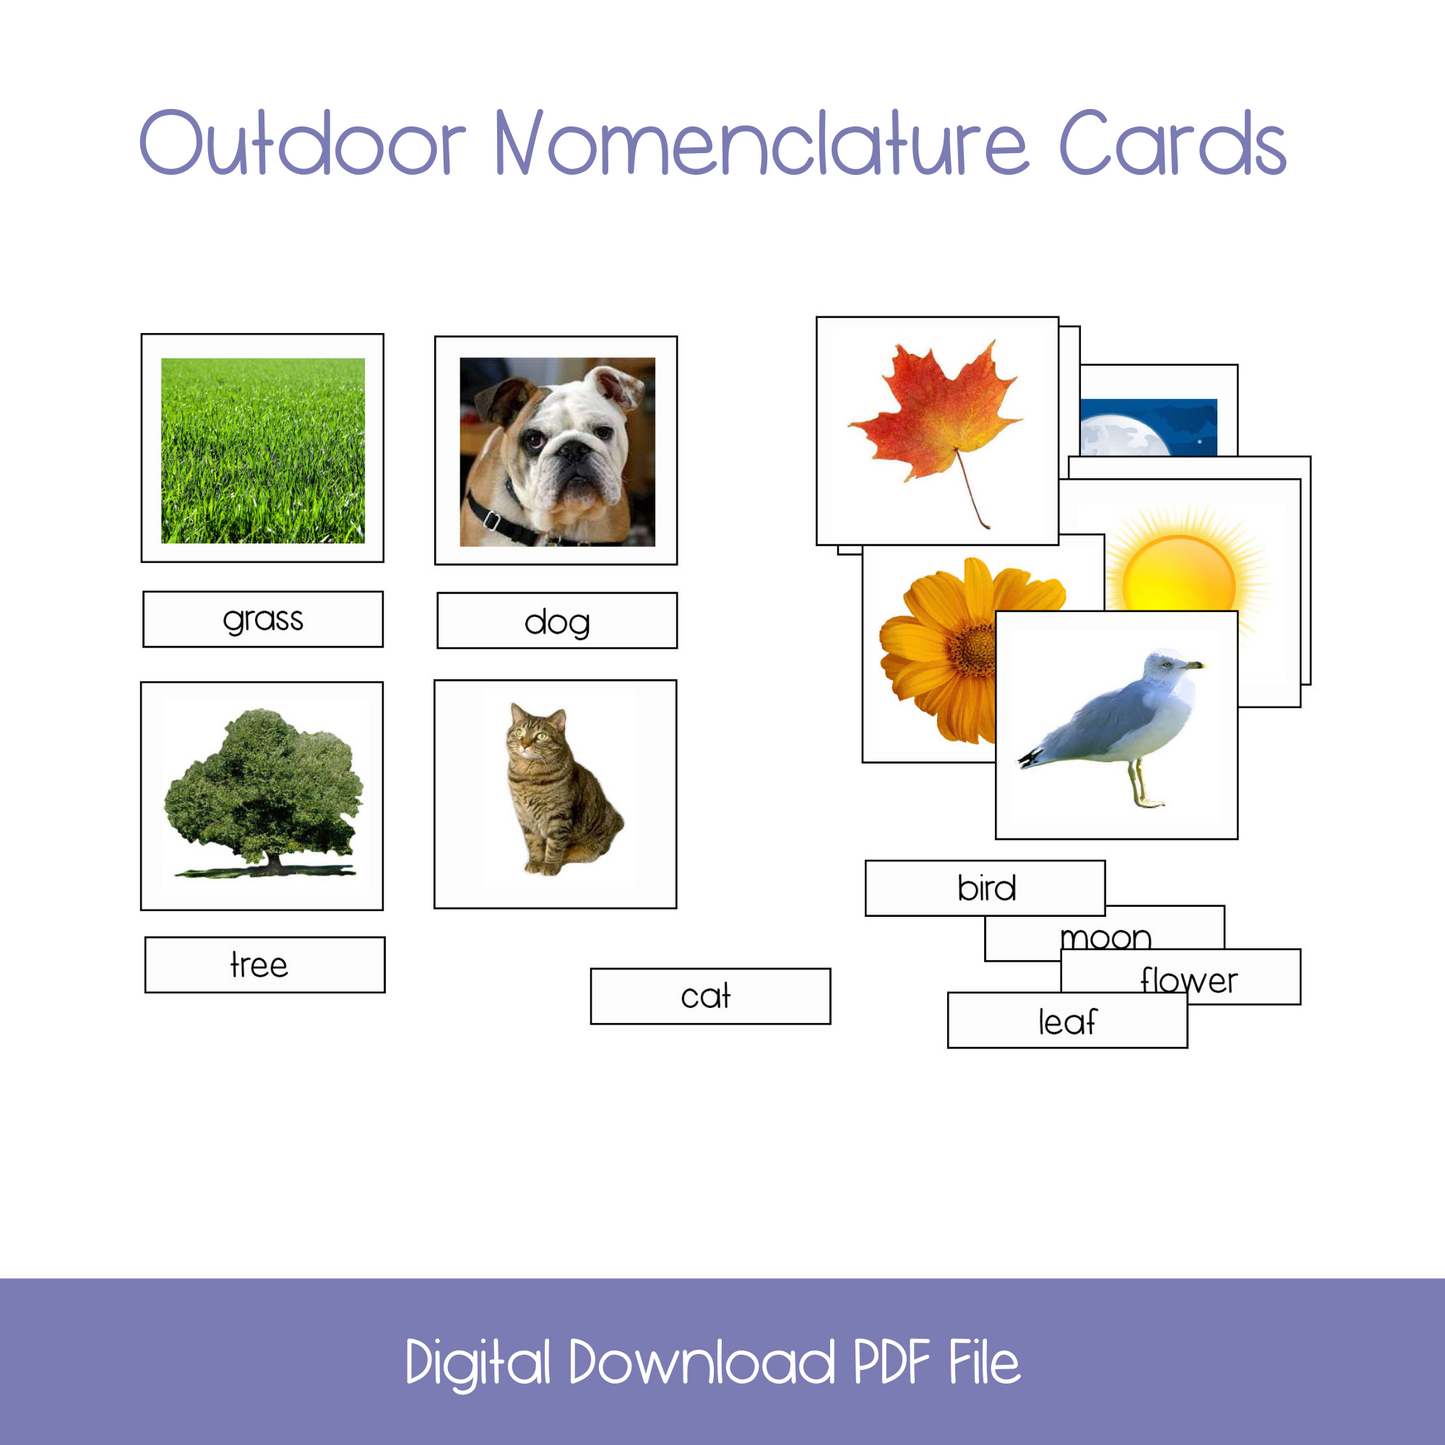 printable  science activities, montessori materials, montessori printables, major biomes activity, elementary science activities, 3-part cards, montessori 3-part cards, life cycle of a butterfly, kindergarten life science, outdoor vocabulary cards,printable  montessori nomenclature cards